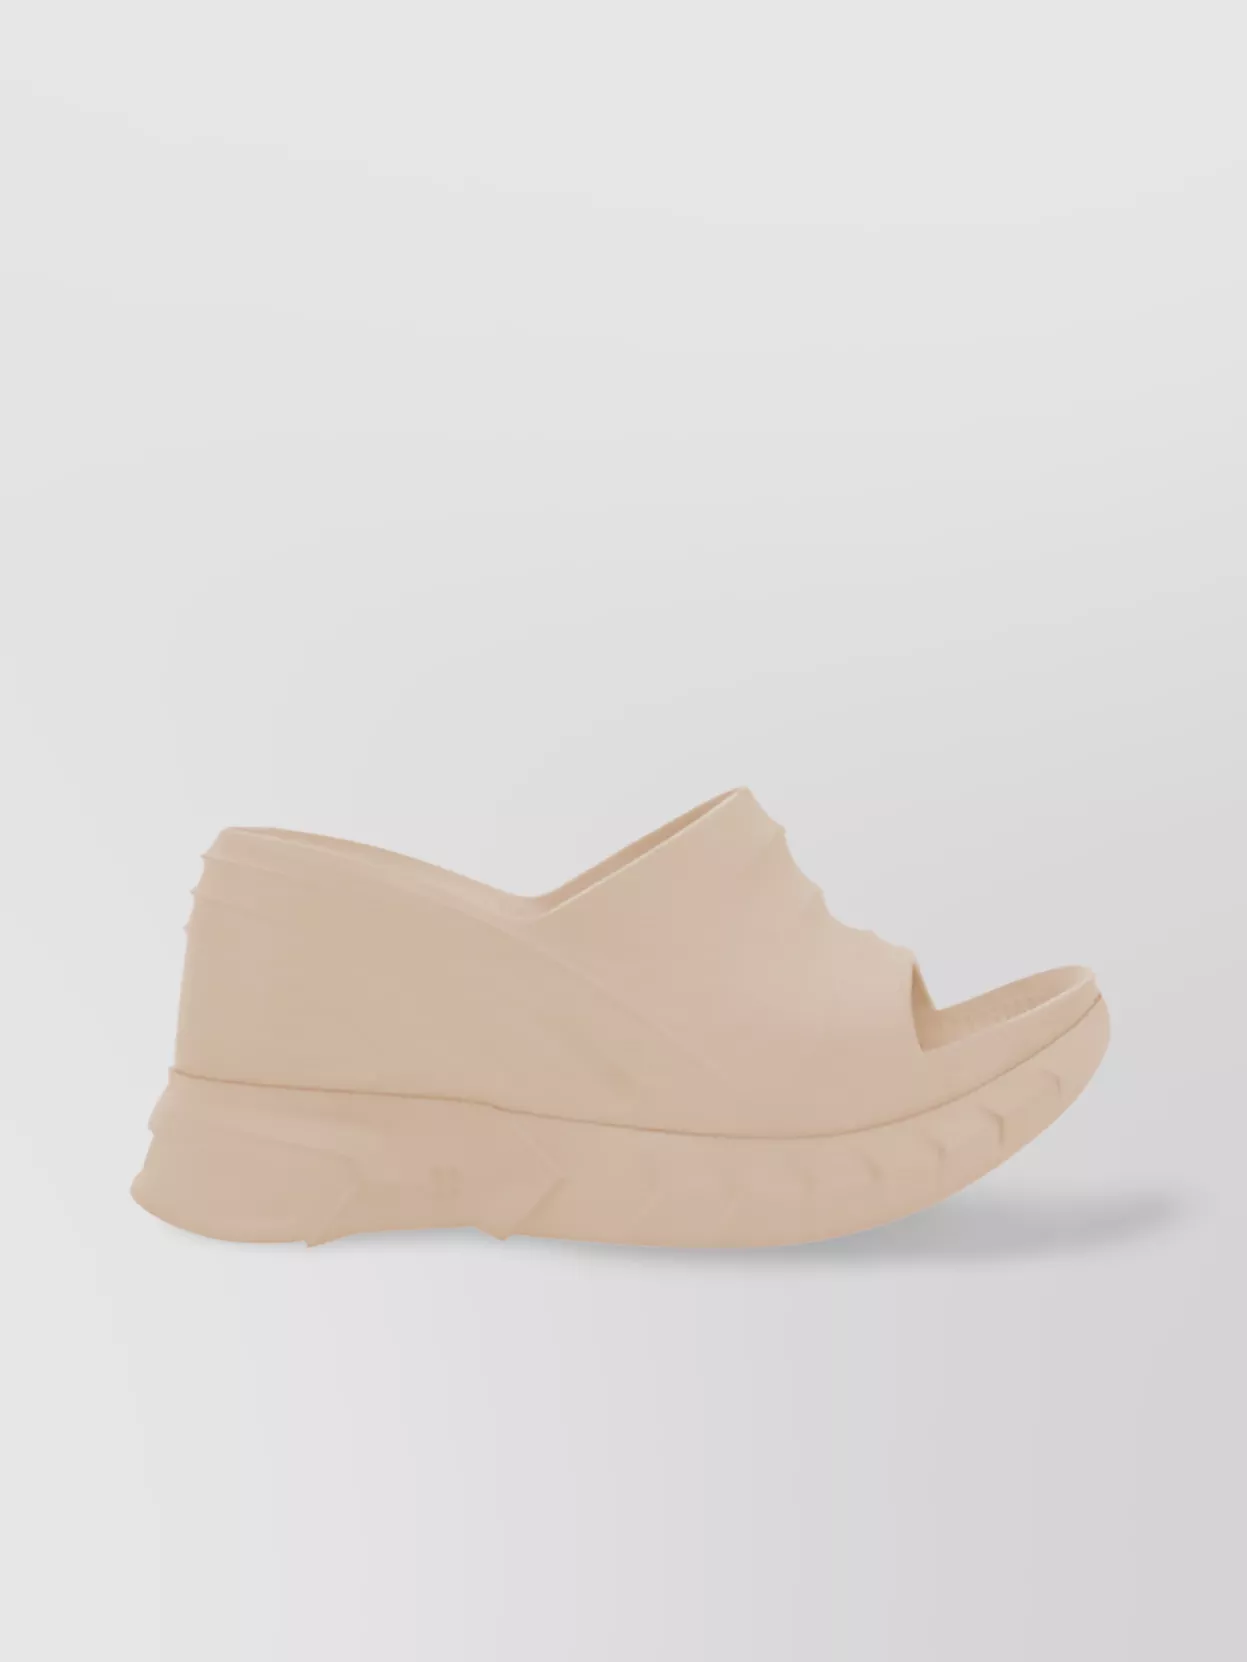 Givenchy Layered Rubber Sole Wedge Sandals